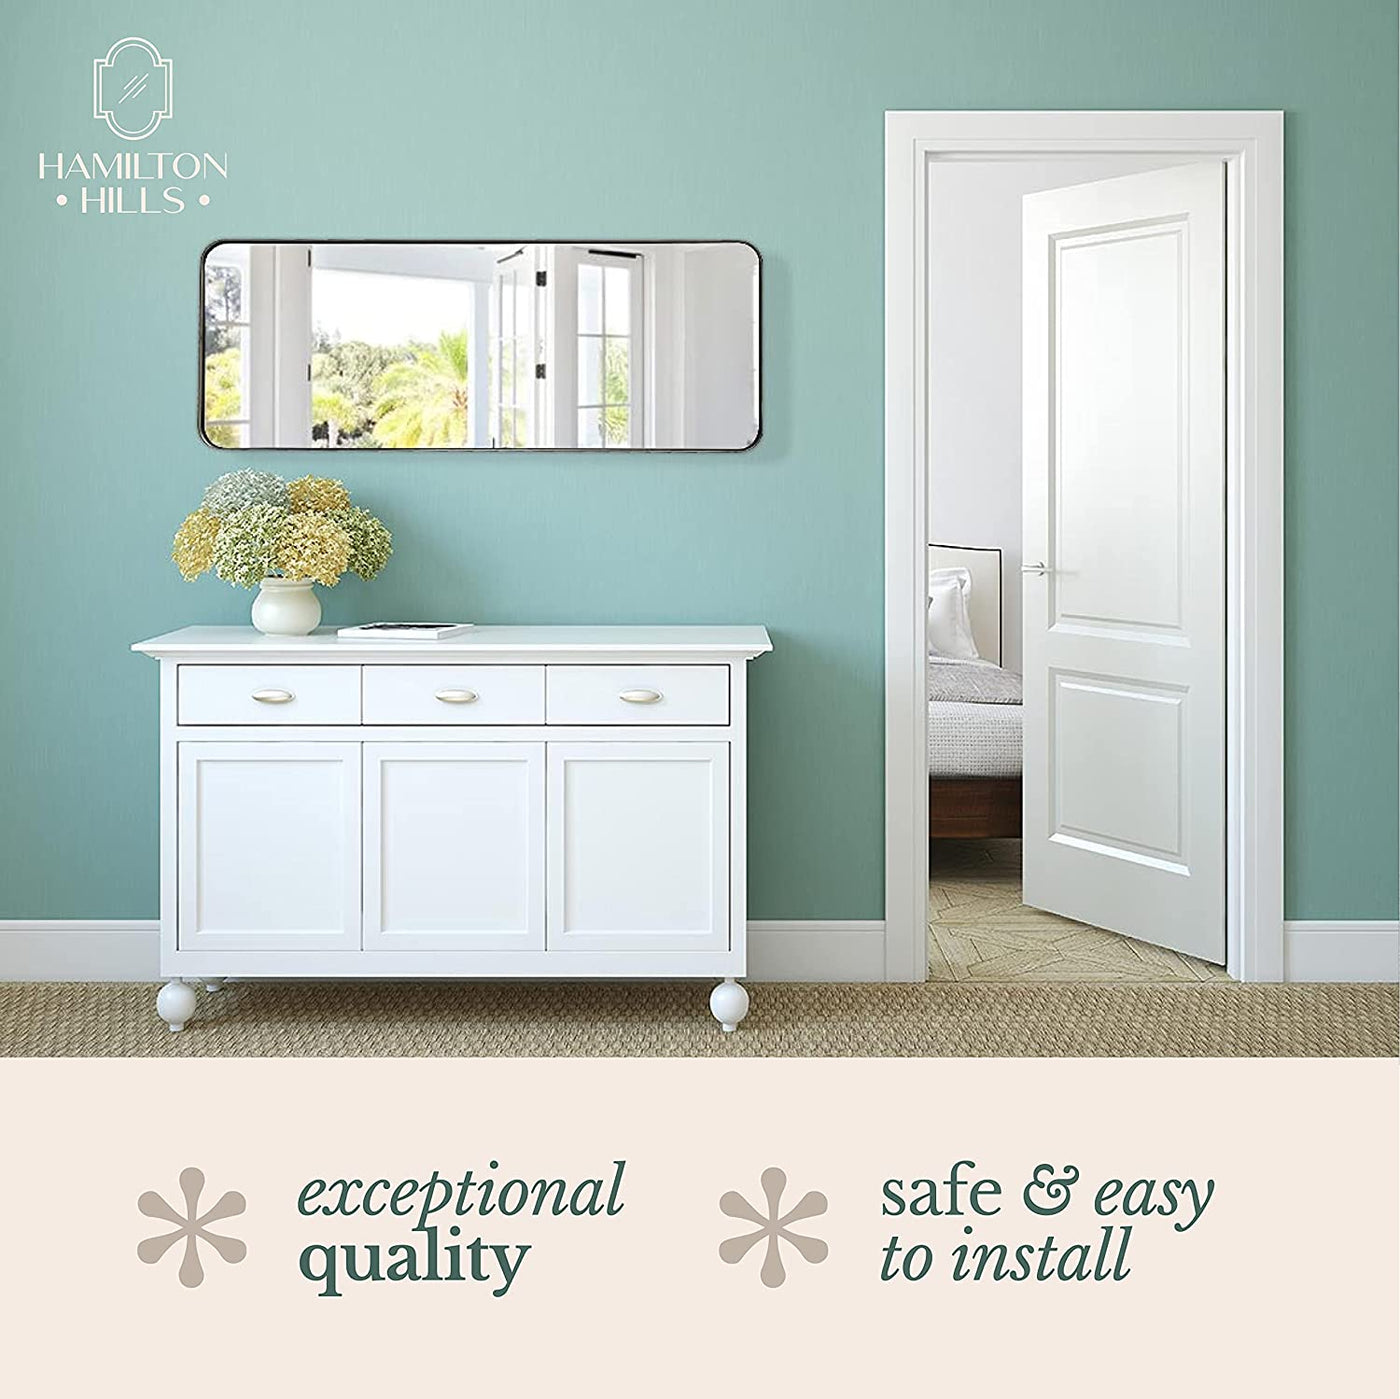 Brushed Metal Wall Mirror | Gold Framed Rounded Corner